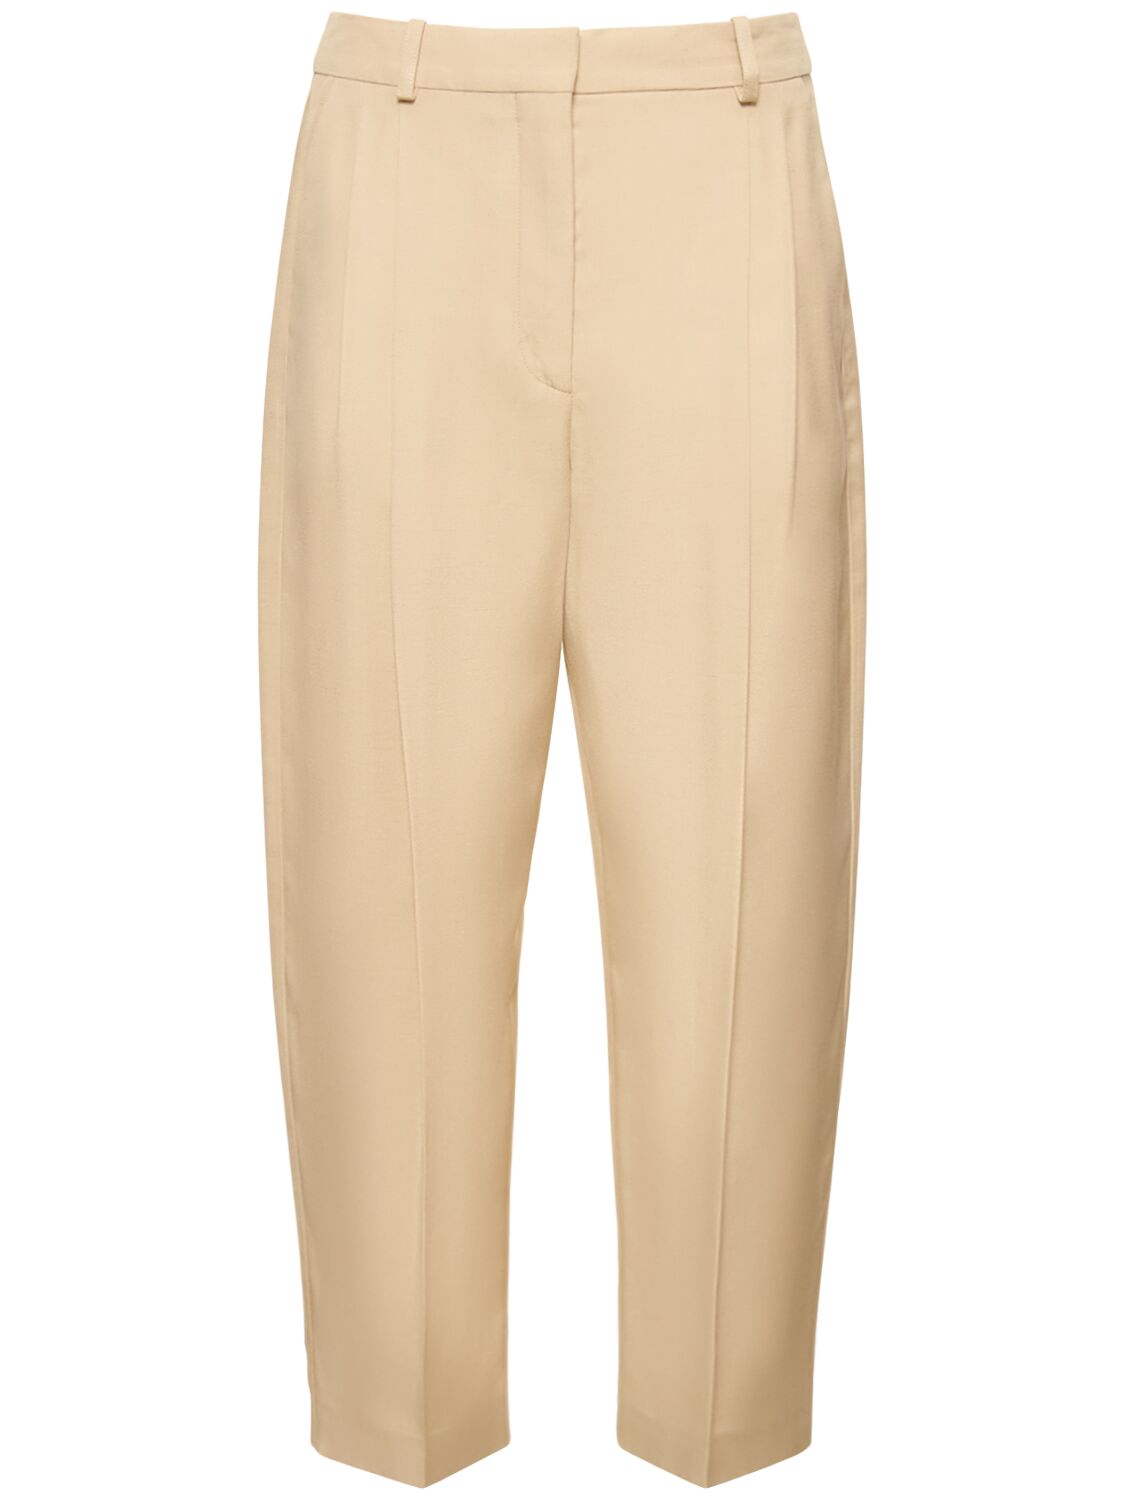 Iconic Pleated Satin Cropped Pants